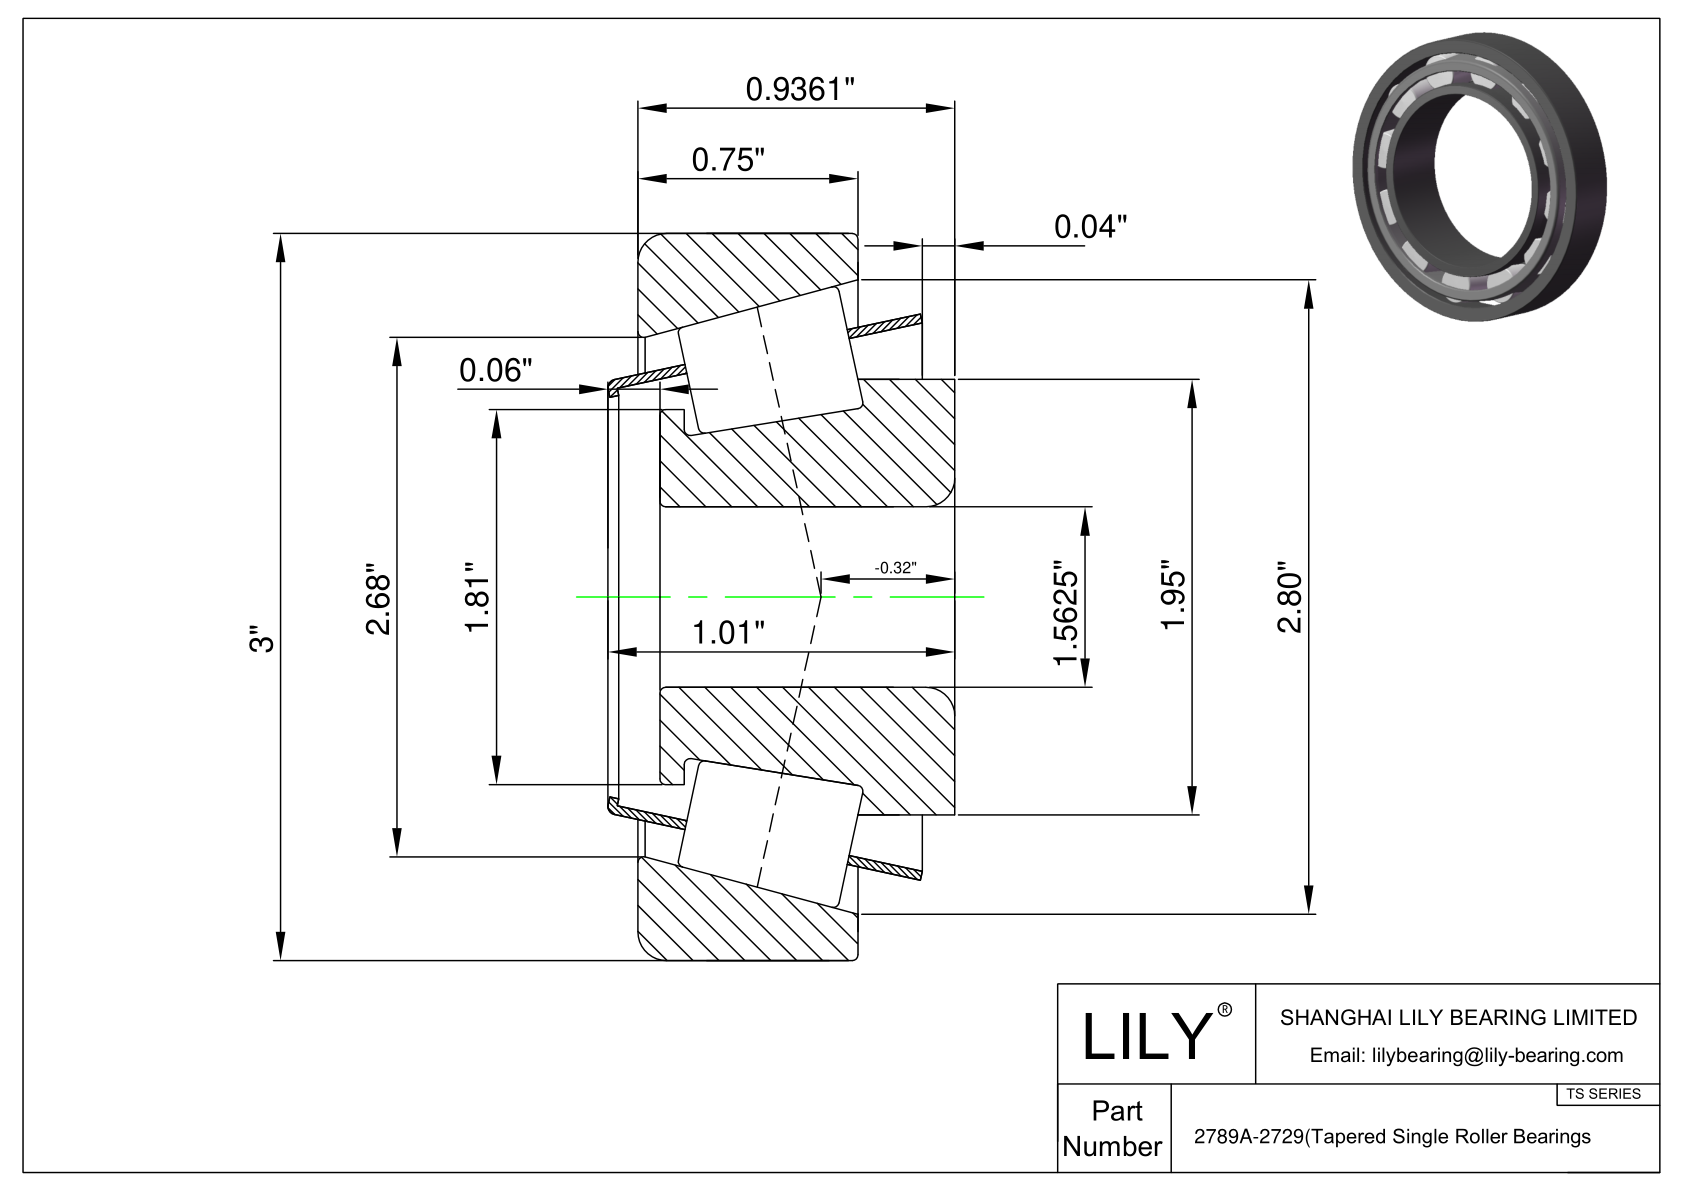 2789A-2729 TS (Tapered Single Roller Bearings) (Imperial) cad drawing